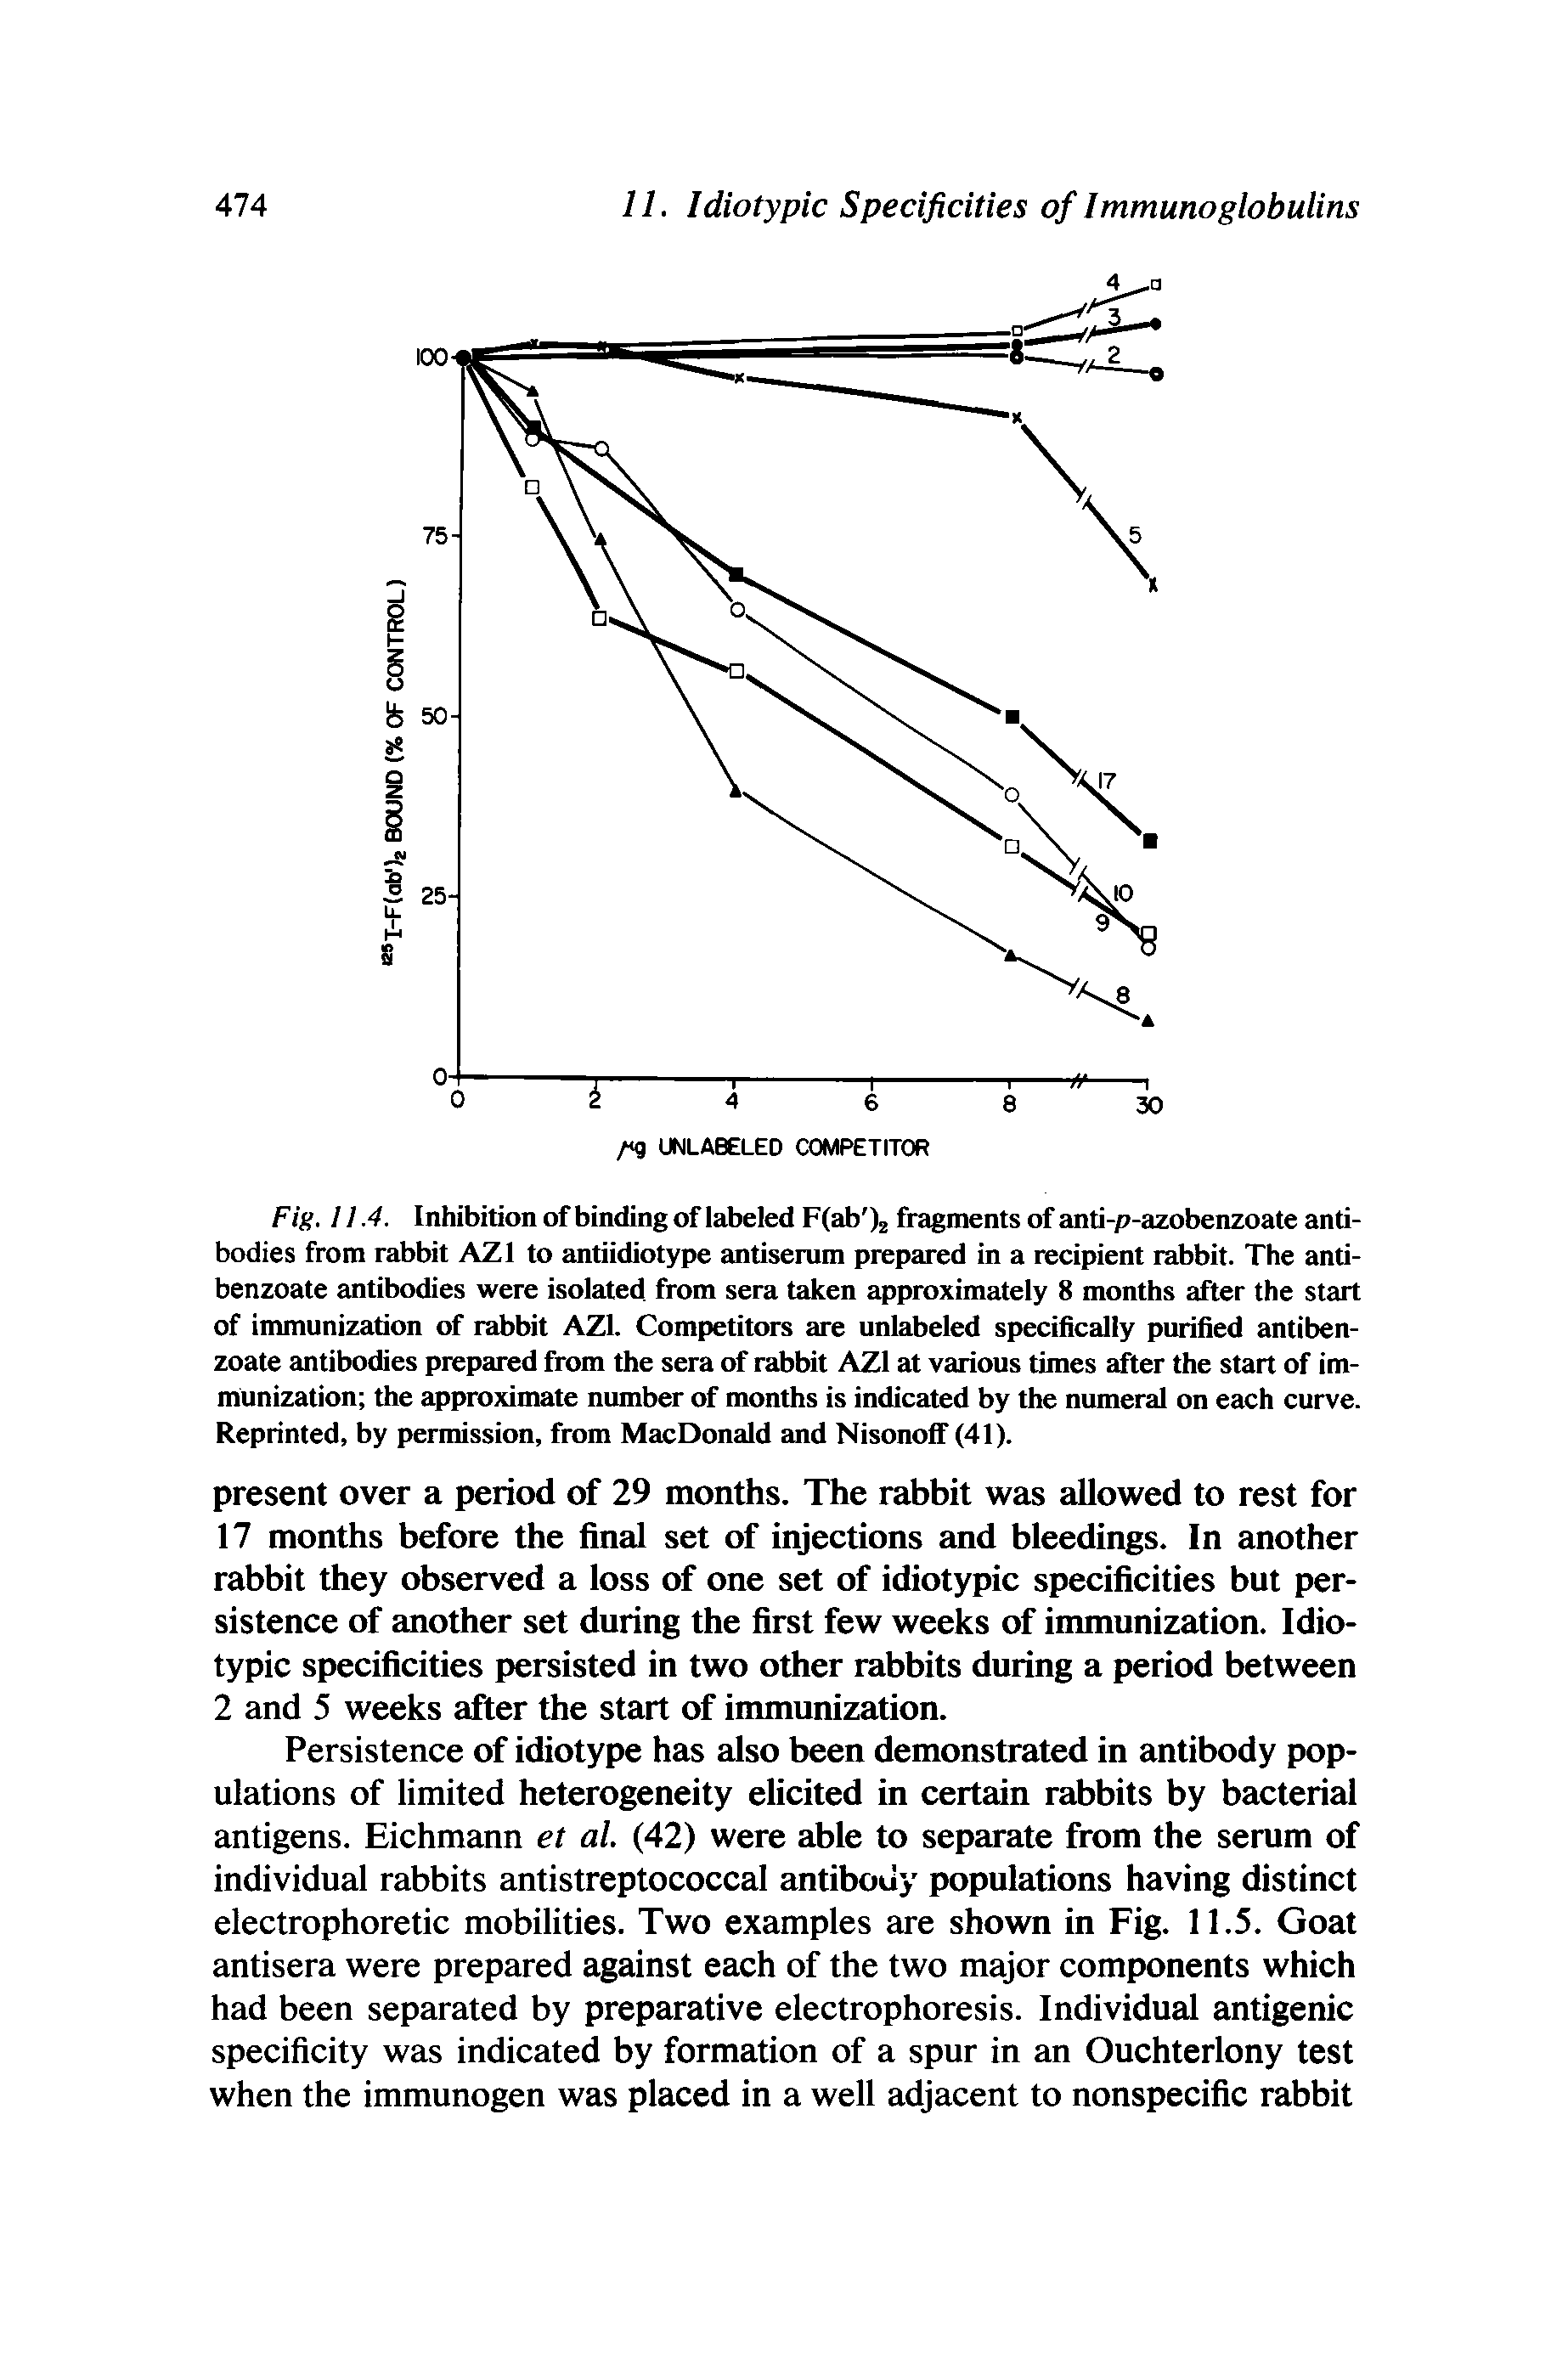 Fig. 11.4. Inhibition of binding of labeled FCab ) fiagments of anti-p-azobenzoate antibodies from rabbit AZl to antiidiotype antiserum prepared in a recipient rabbit. The antibenzoate antibodies were isolated from sera taken approximately 8 months after the start of immunization of rabbit AZL Competitors are unlabeled specifically purified antibenzoate antibodies prepared from the sera of rabbit AZl at various times after the start of immunization the approximate number of months is indicated by the numeral on each curve. Reprinted, by permission, from MacDonald and Nisonoff (41).